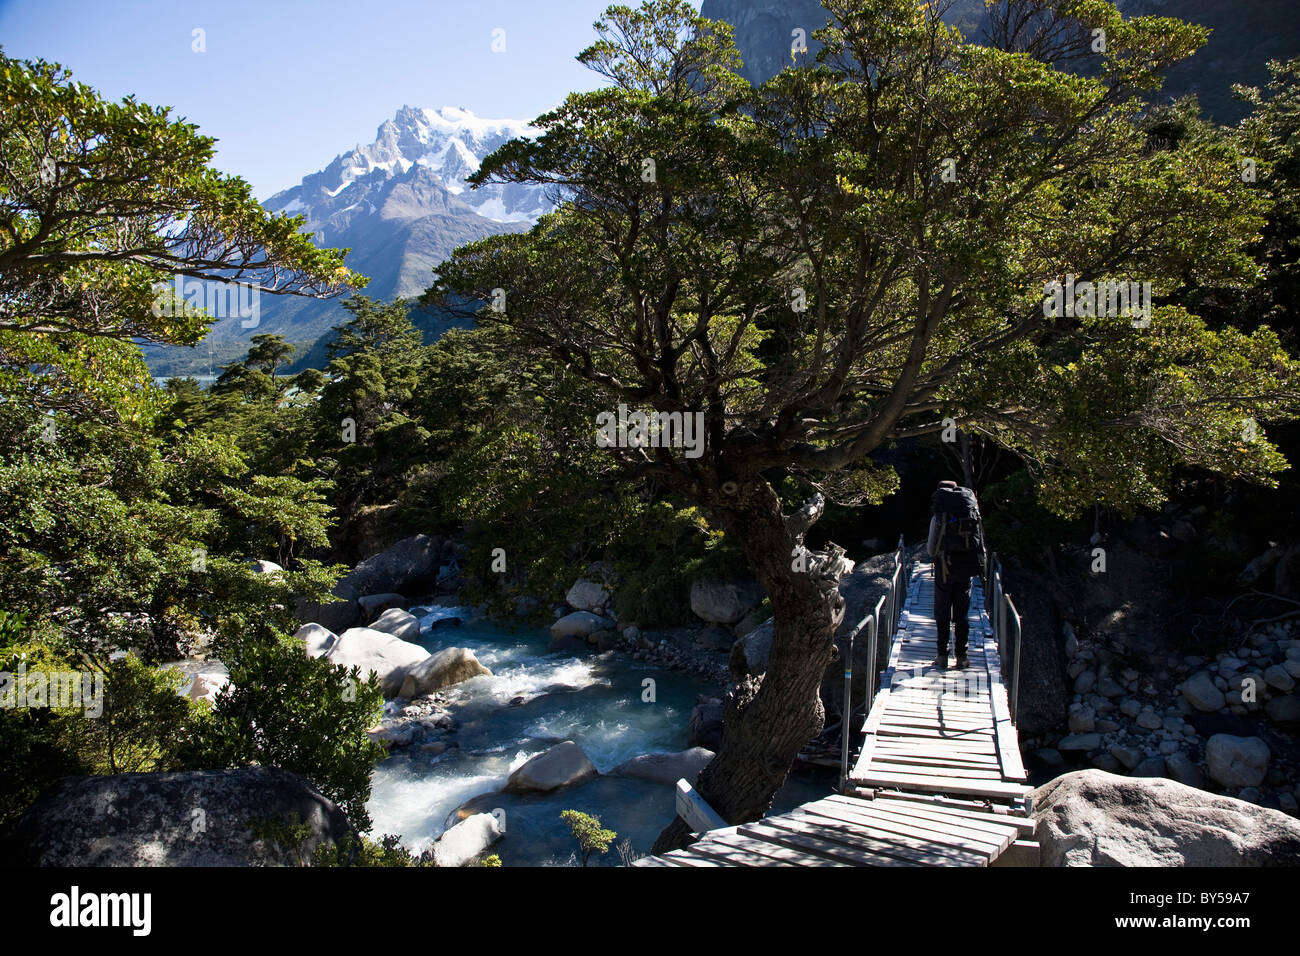 A person crossing a river while hiking through mountains, Patagonia, Chile Stock Photo